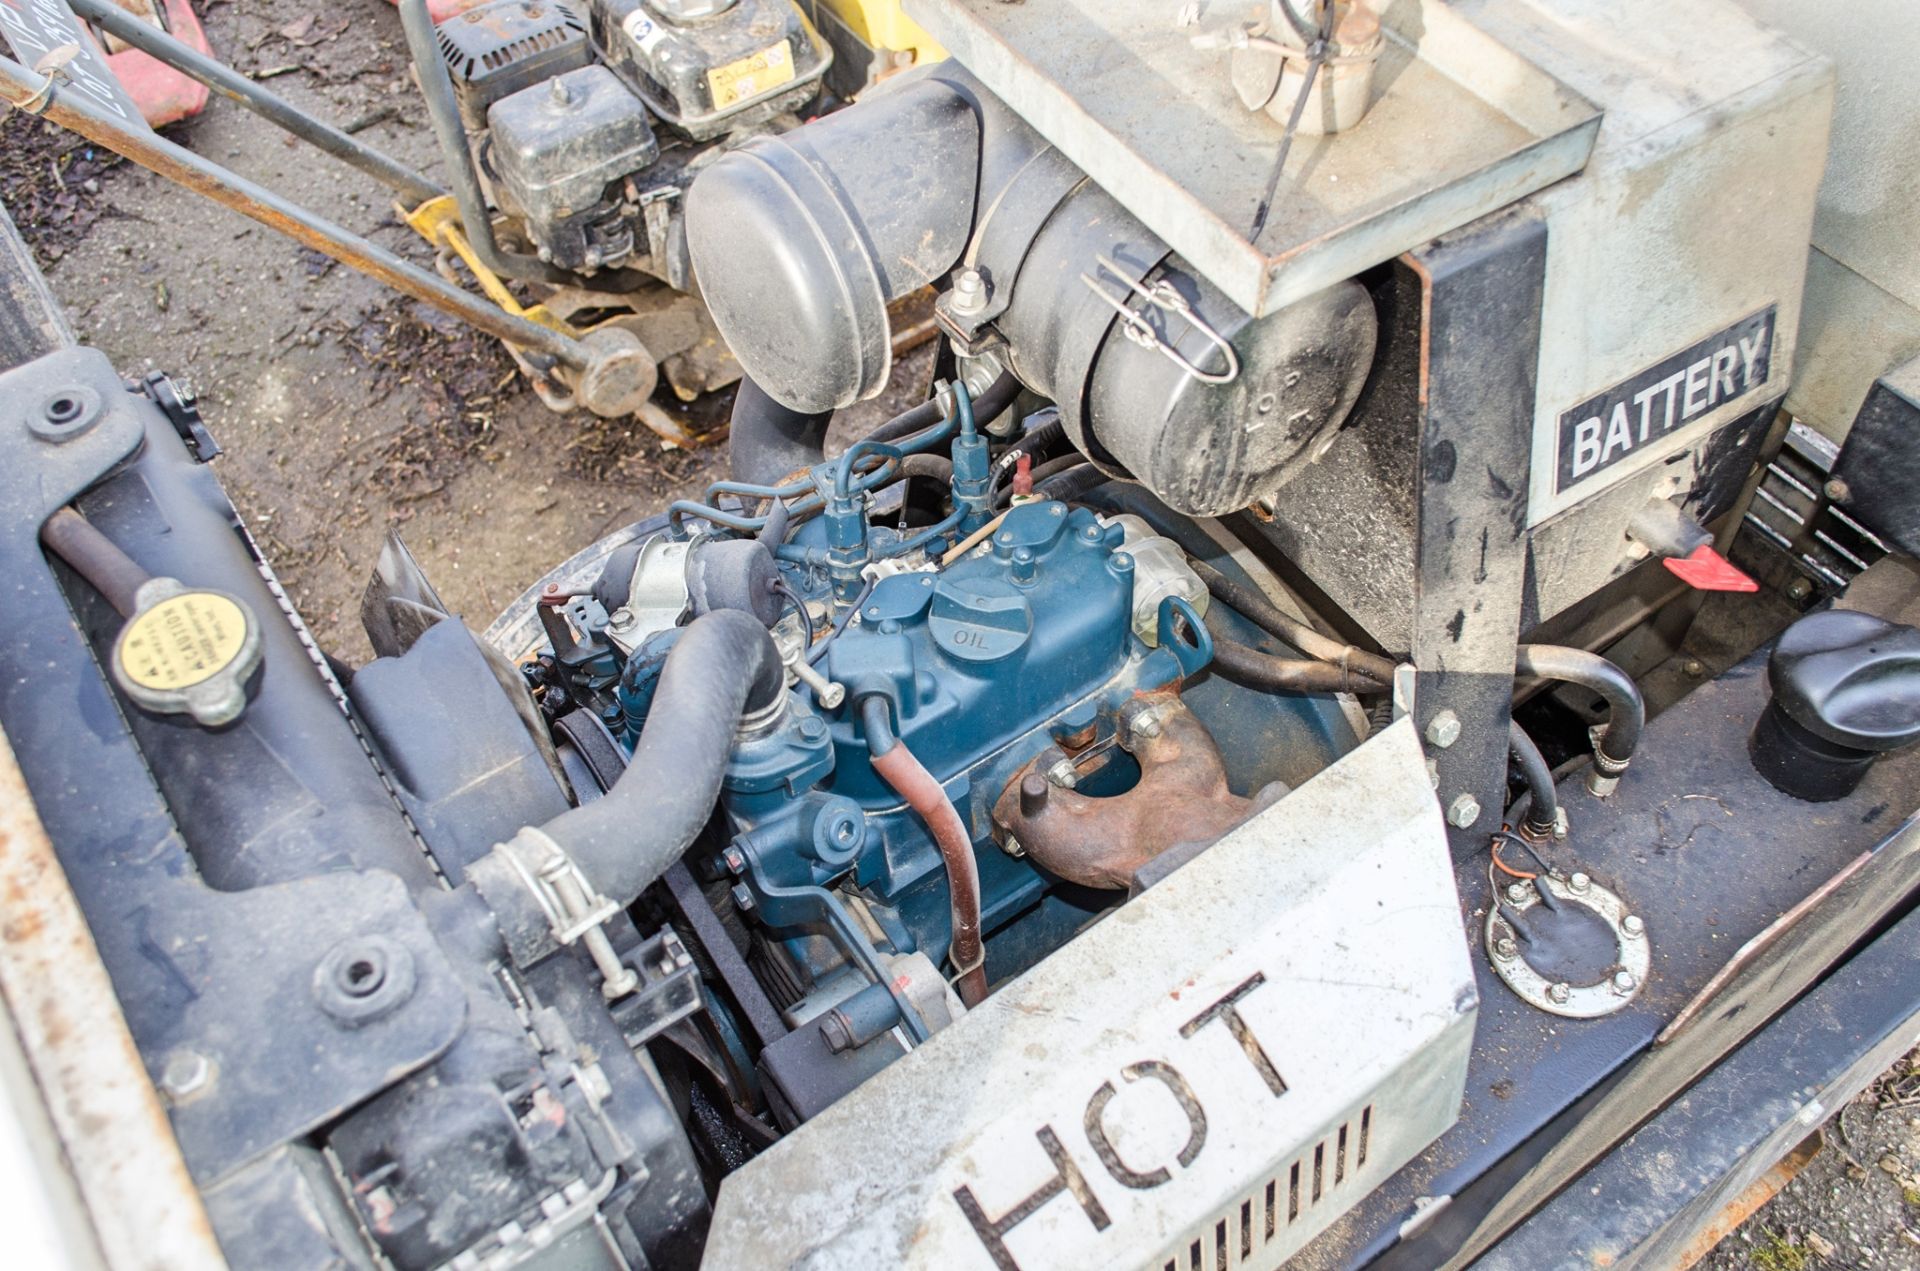 MHM MG6000 SSK-Y 6 kva diesel driven generator S/N: 229150134 Recorded hours: 4519 A723324 - Image 4 of 5